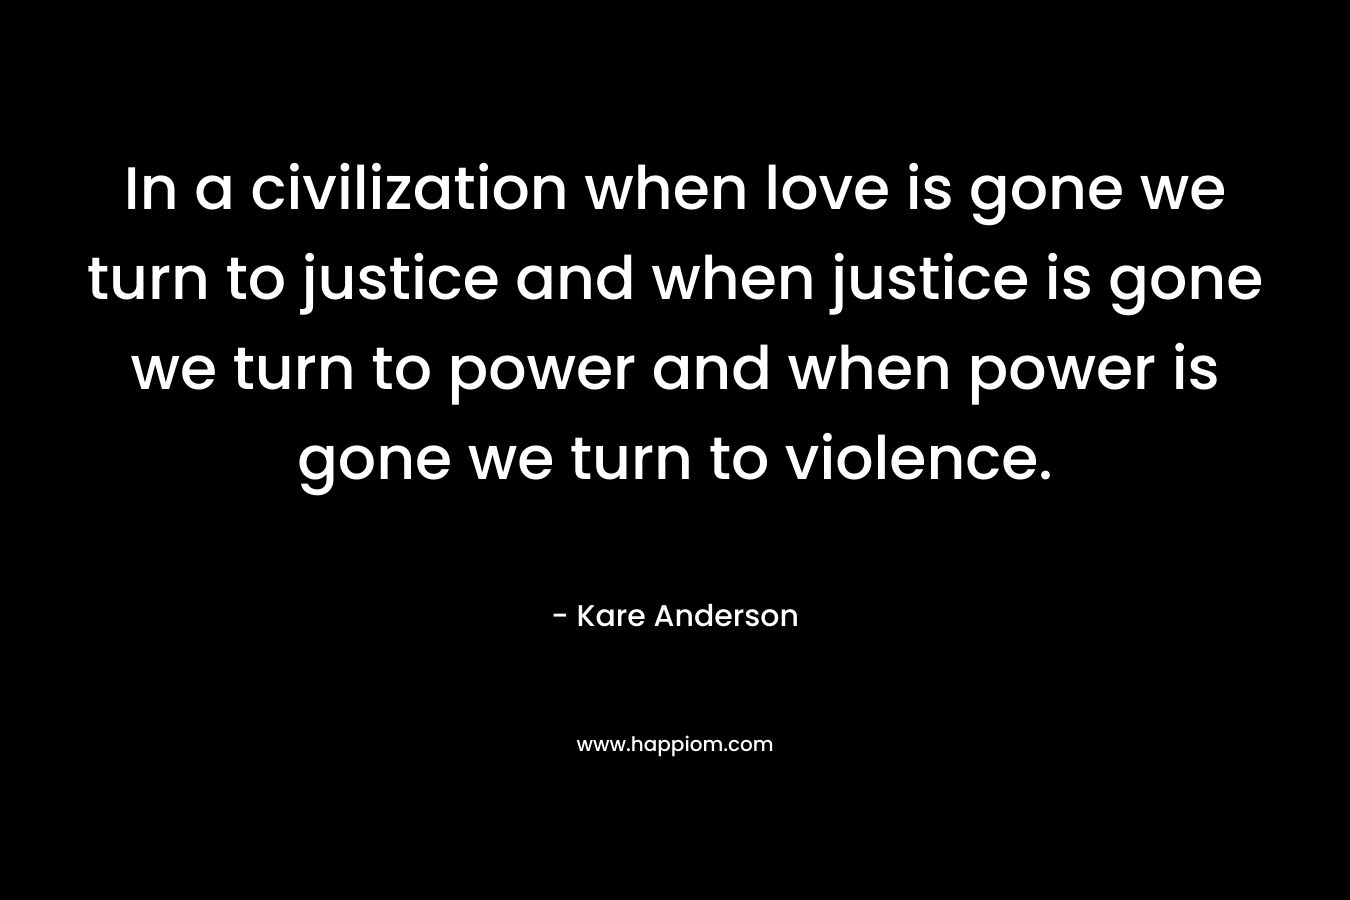 In a civilization when love is gone we turn to justice and when justice is gone we turn to power and when power is gone we turn to violence.